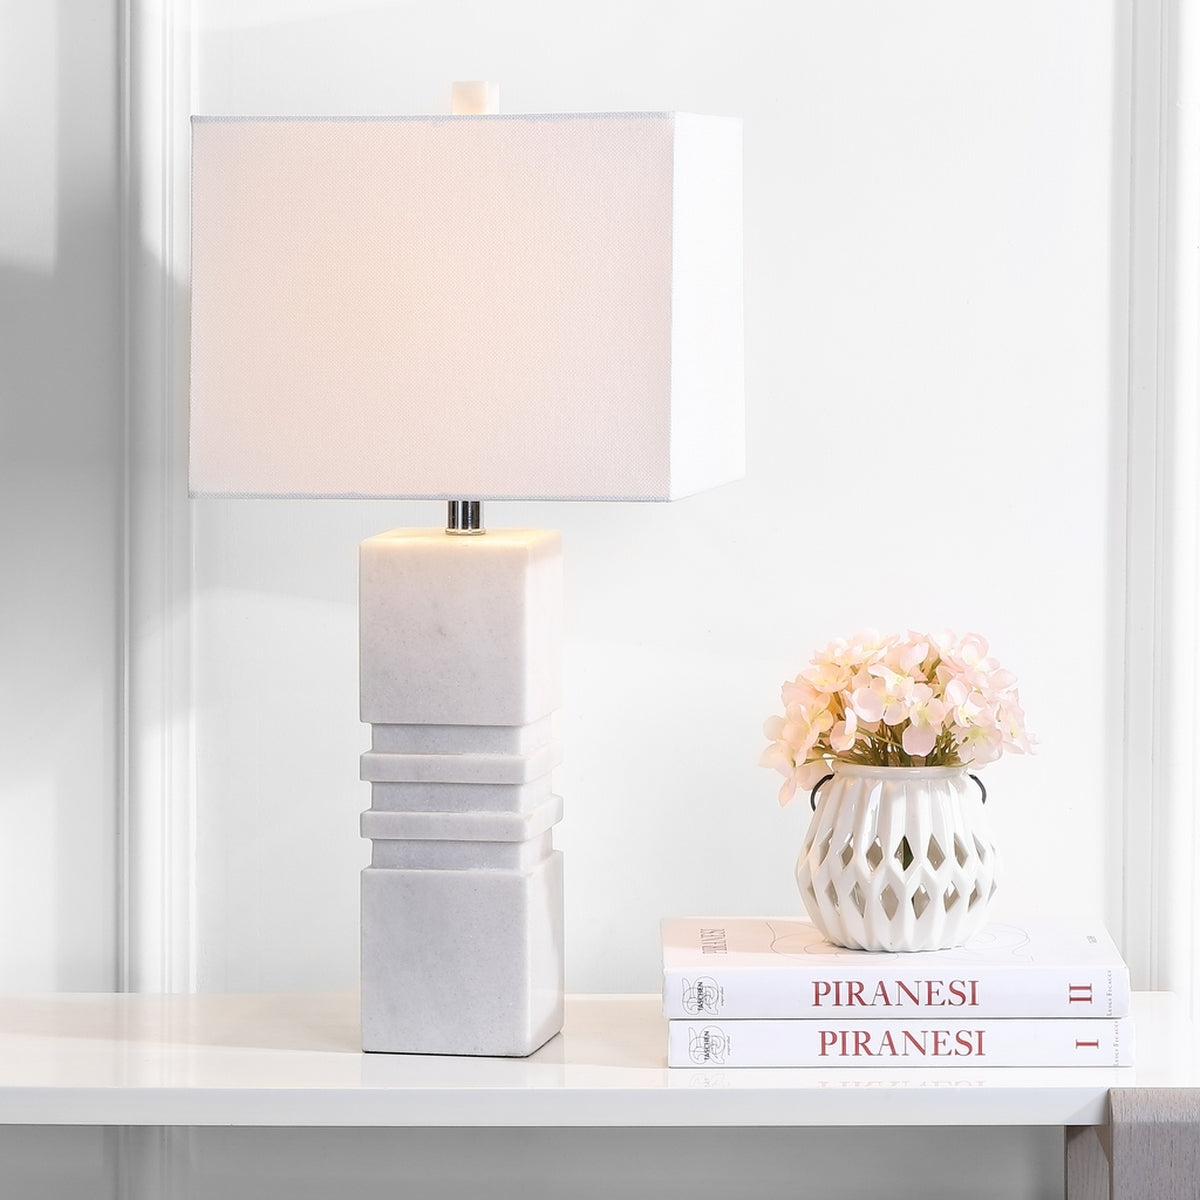 Tall Modernist White Marble Table Lamp by Kevin Francis Design | Luxury Home Decor